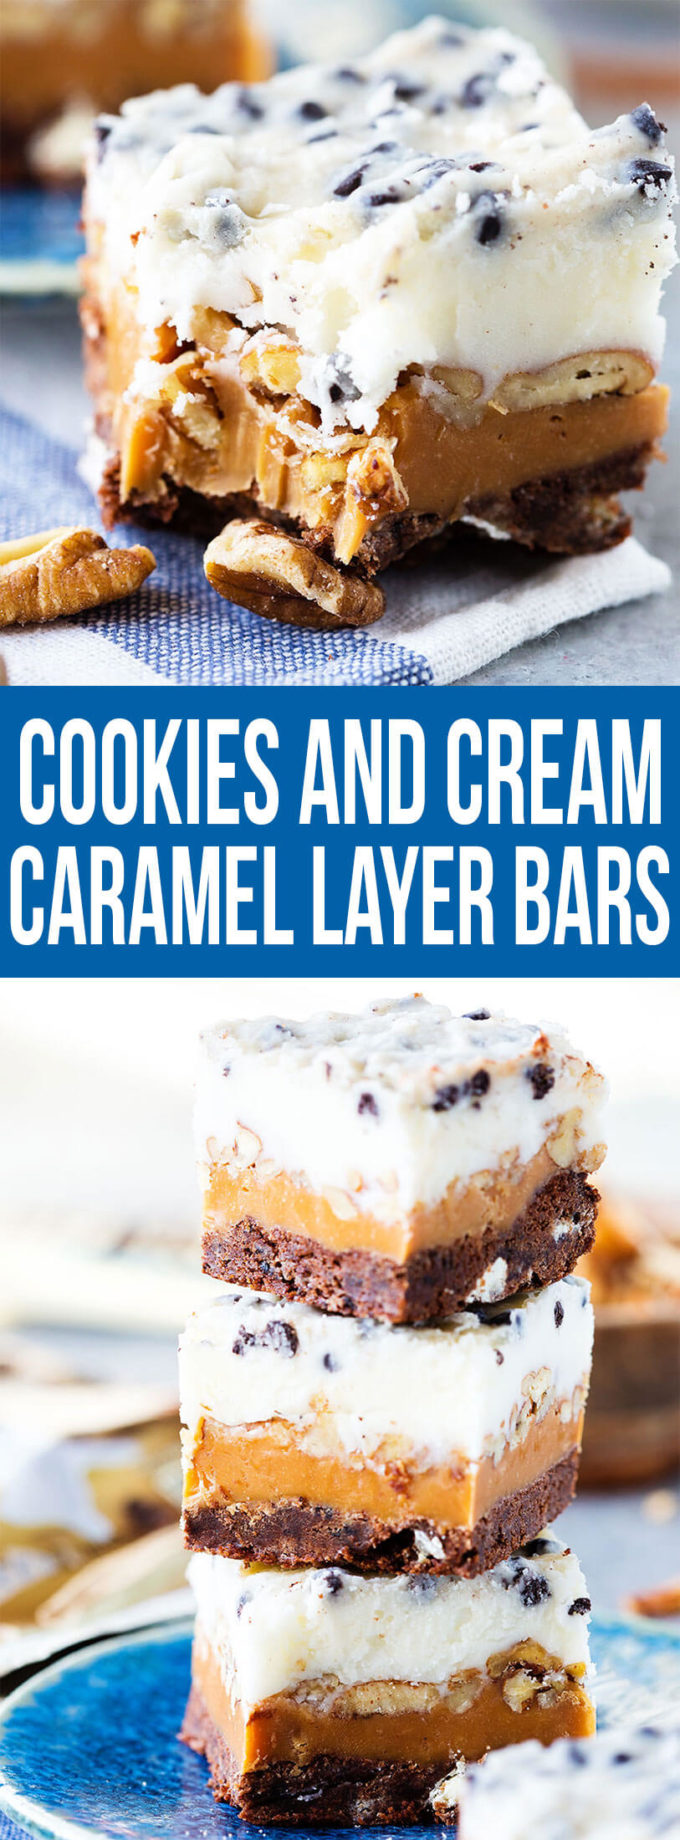 These Cookies and Cream Caramel Layer bars are the category winner for the 48th Pillsbury Bake-Off and they are so tasty